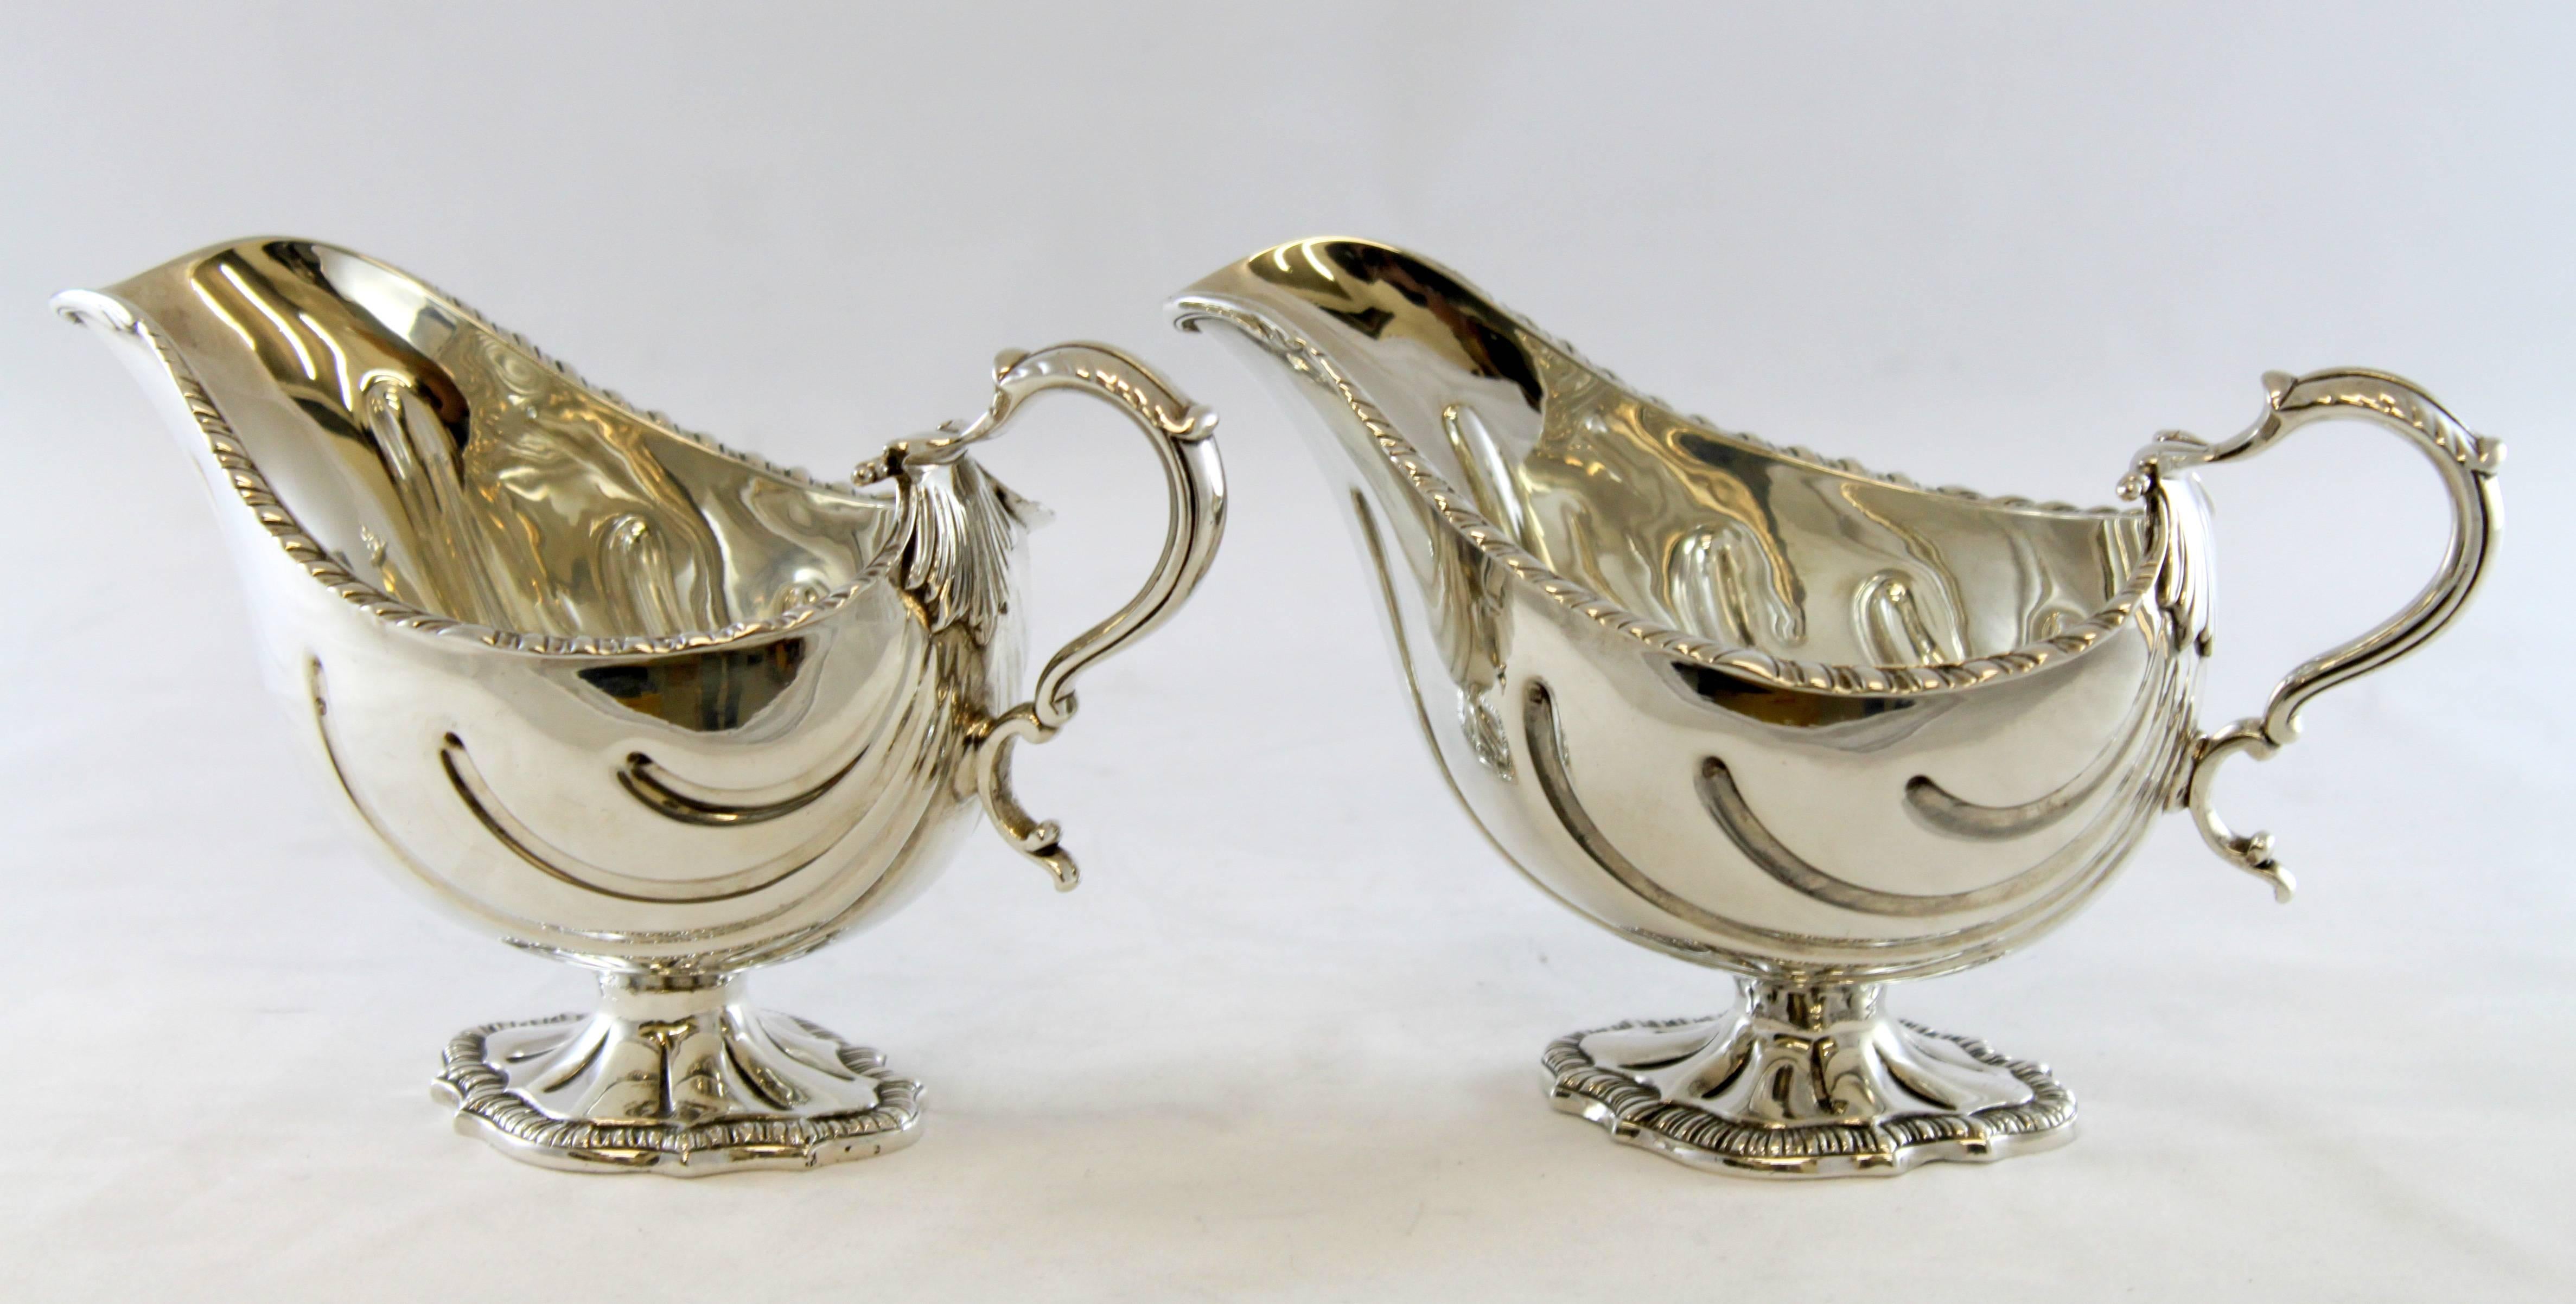 Antique pair of sterling silver cream jars 
Maker: Carrington & Co 
Made in London, 1900.
Fully hallmarked. 

Dimensions: 
Size: 19.5 x 10.1 x 12 cm 
Weight: 765 grams total.

Condition: Surface wear and tear from general usage, has a